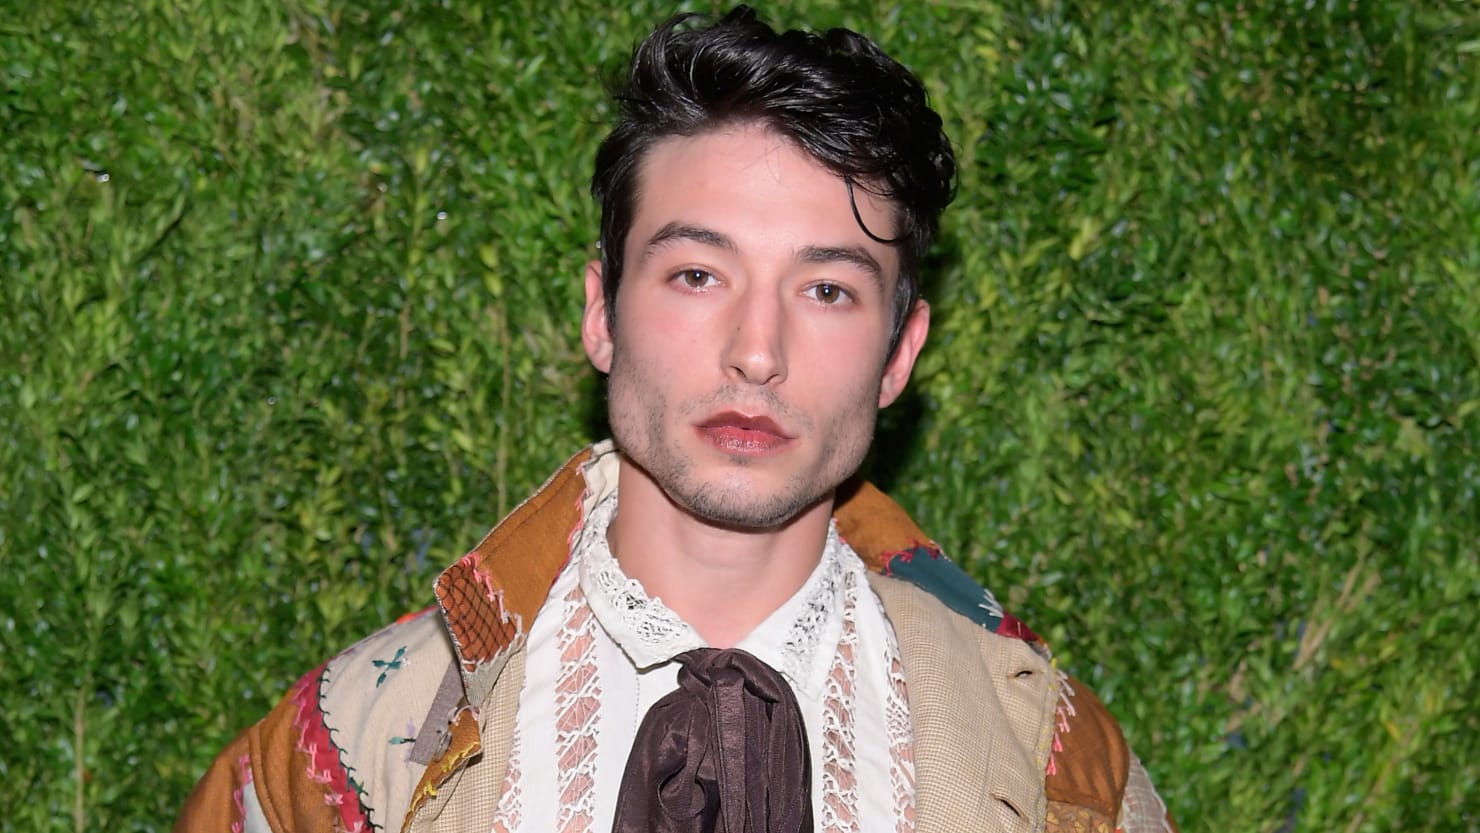 Fans of ‘Justice League’ should not forget the Ezra Miller Attack Video